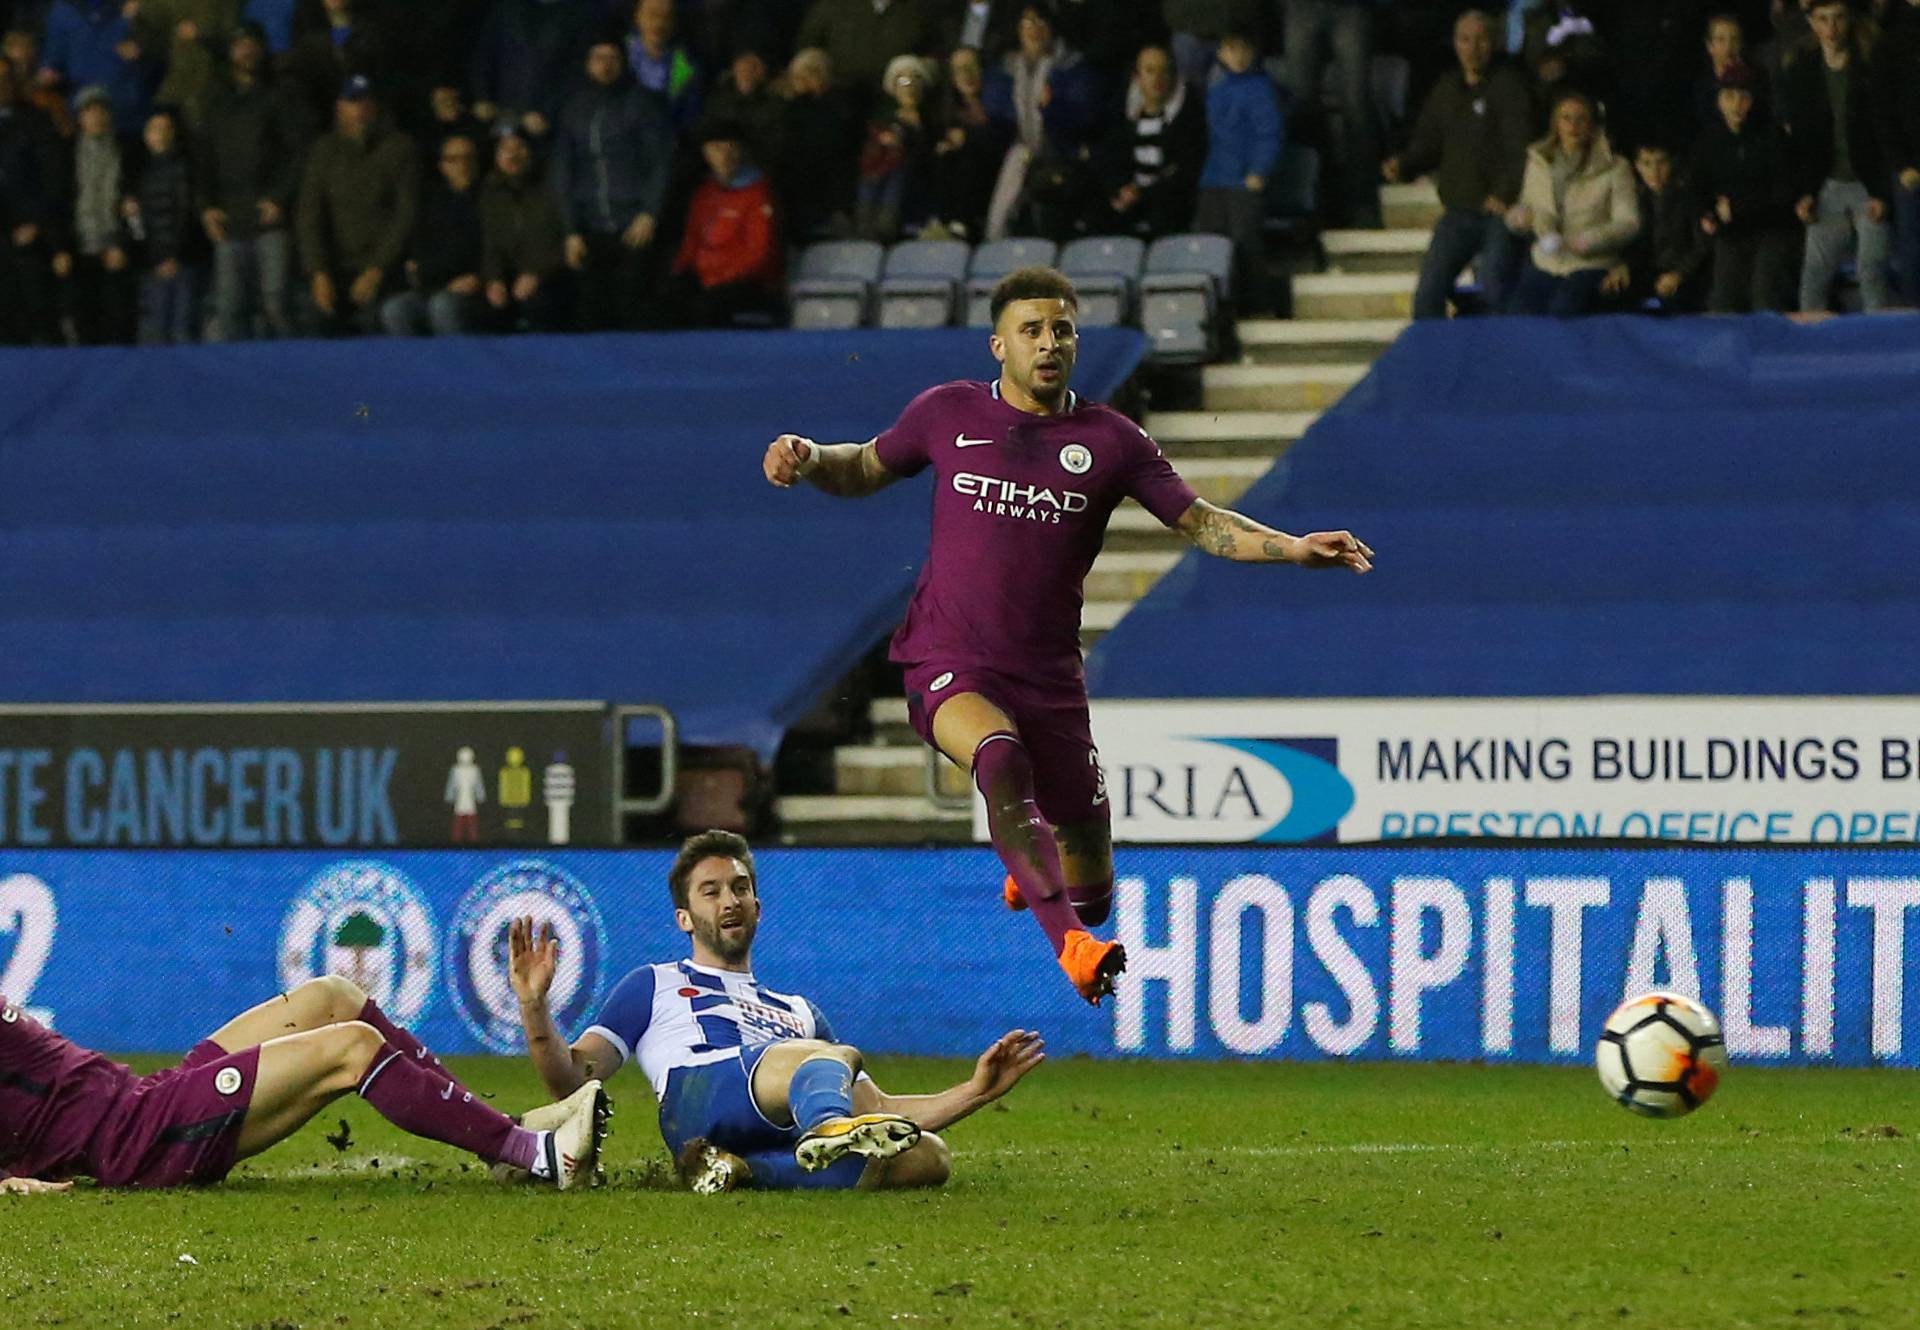 FA Cup Fifth Round - Wigan Athletic vs Manchester City